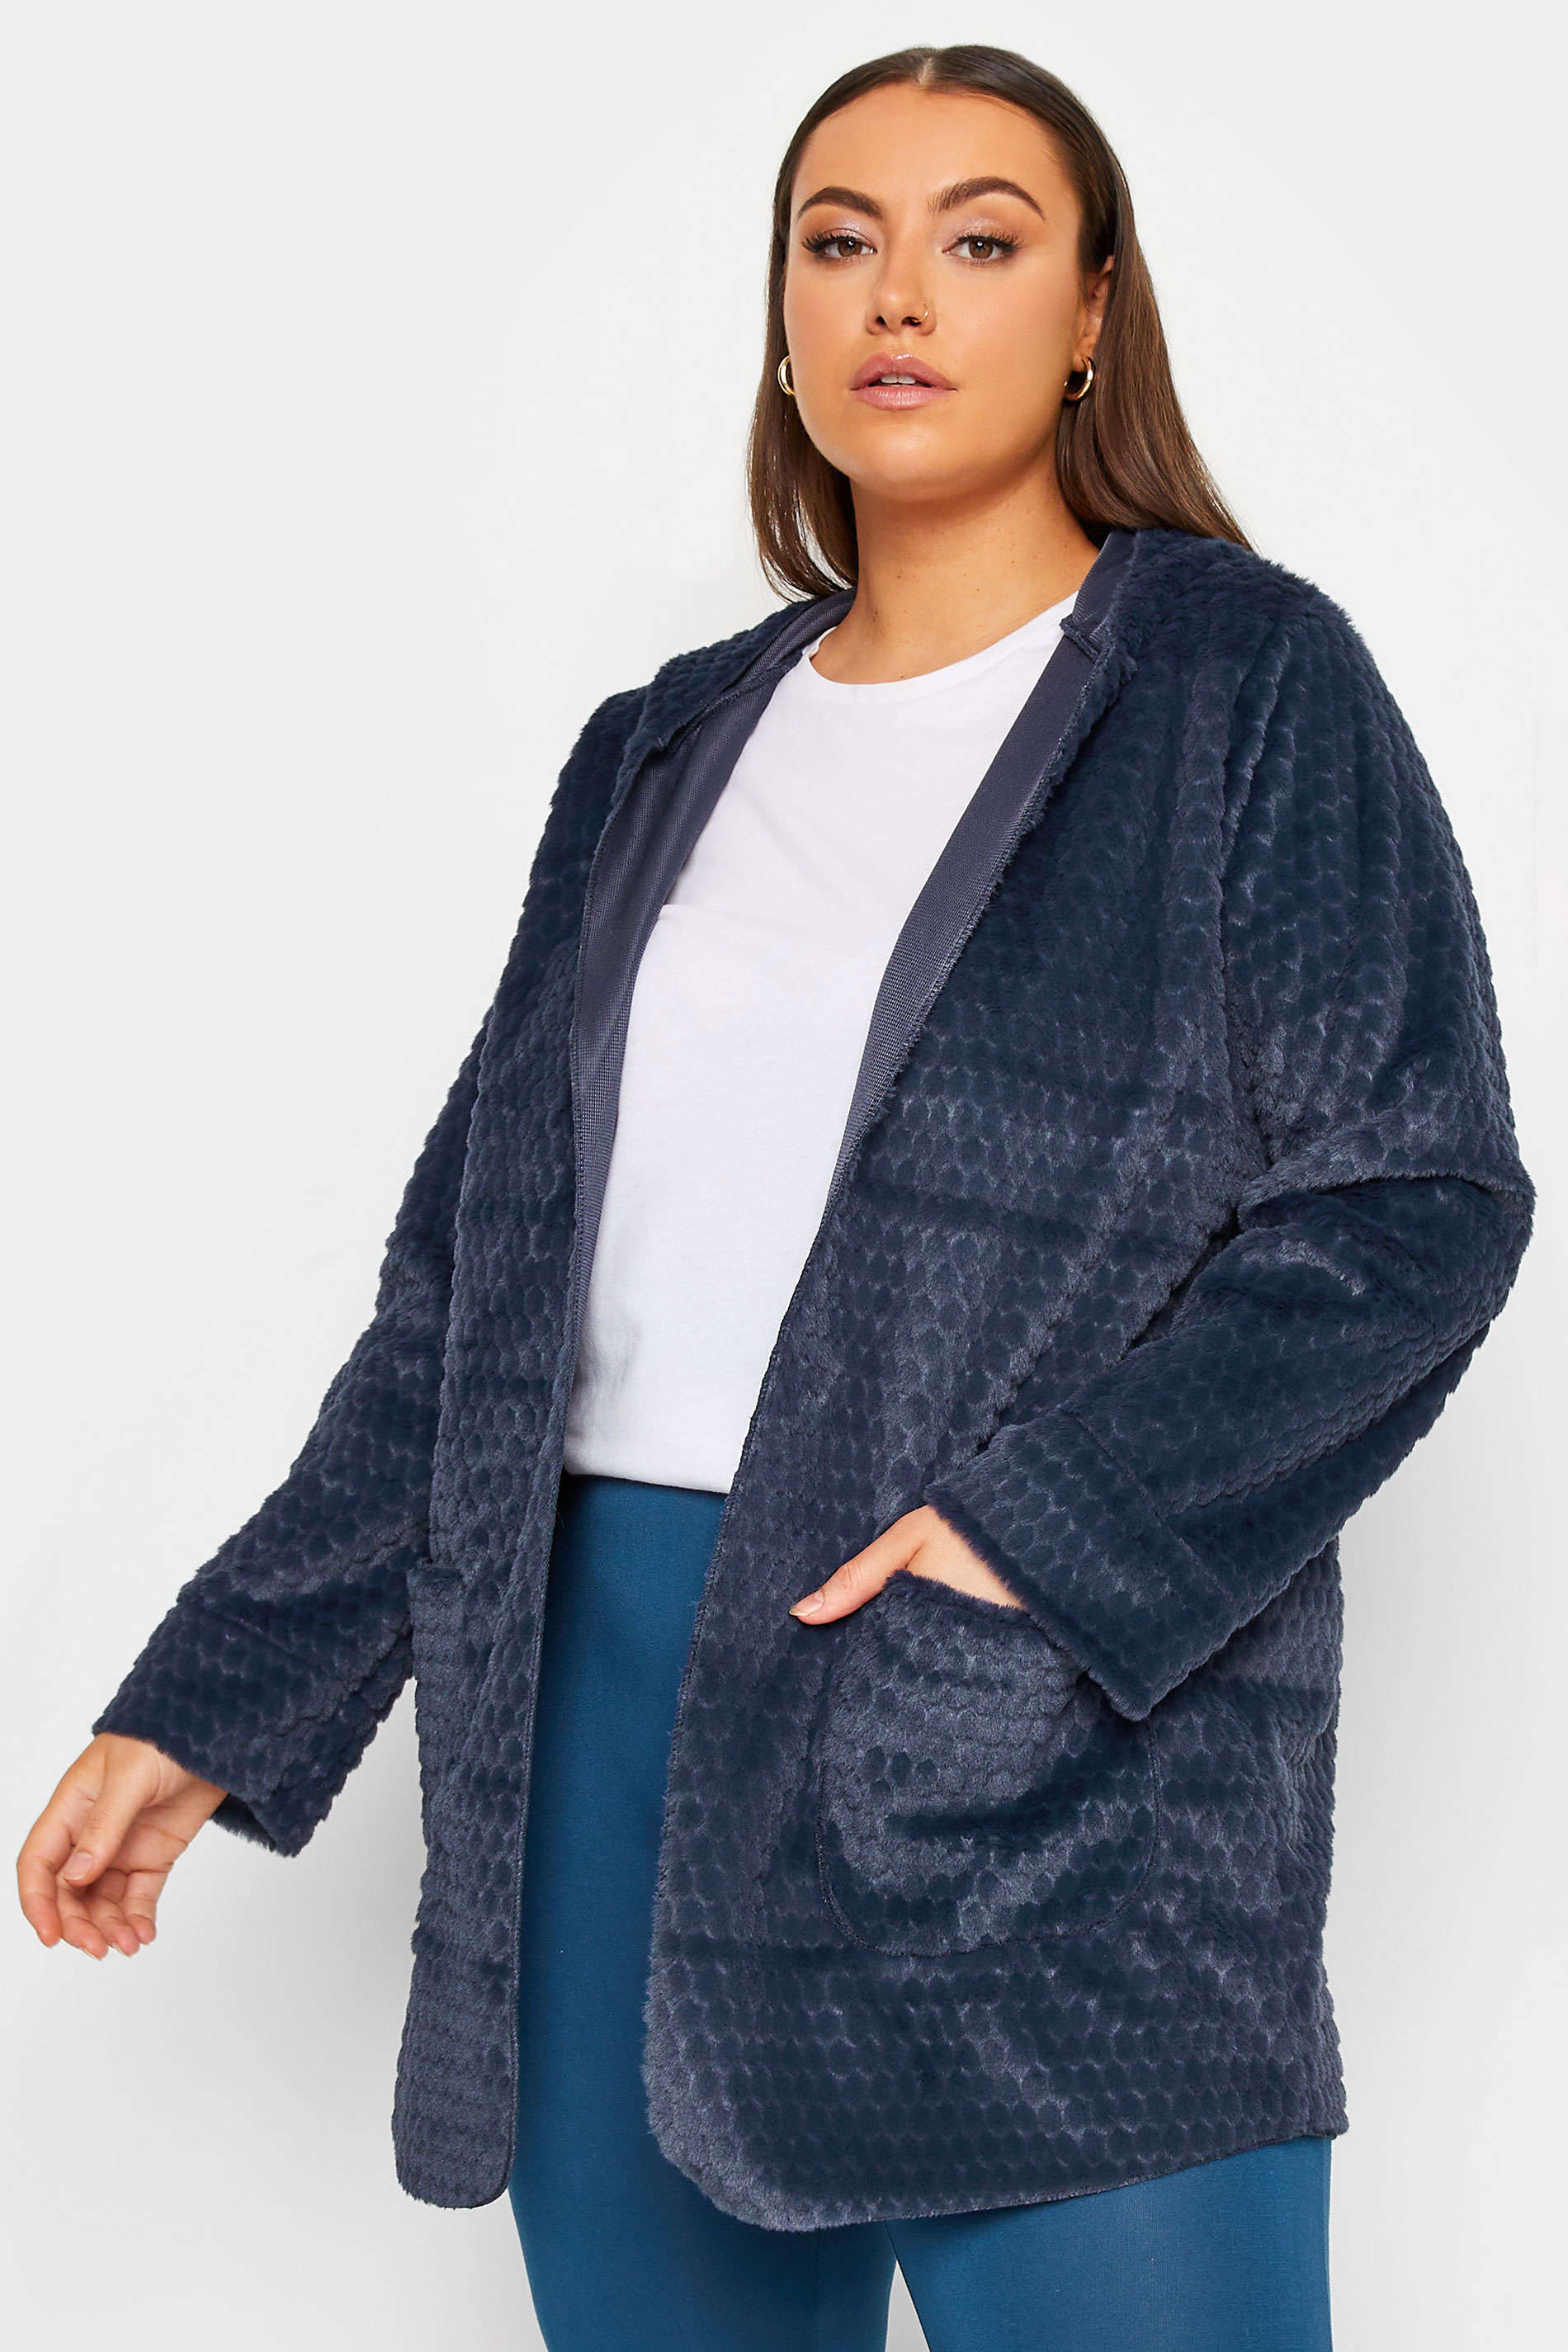 YOURS LUXURY Plus Size Navy Blue Faux Fur Hooded Jacket | Yours Clothing 1